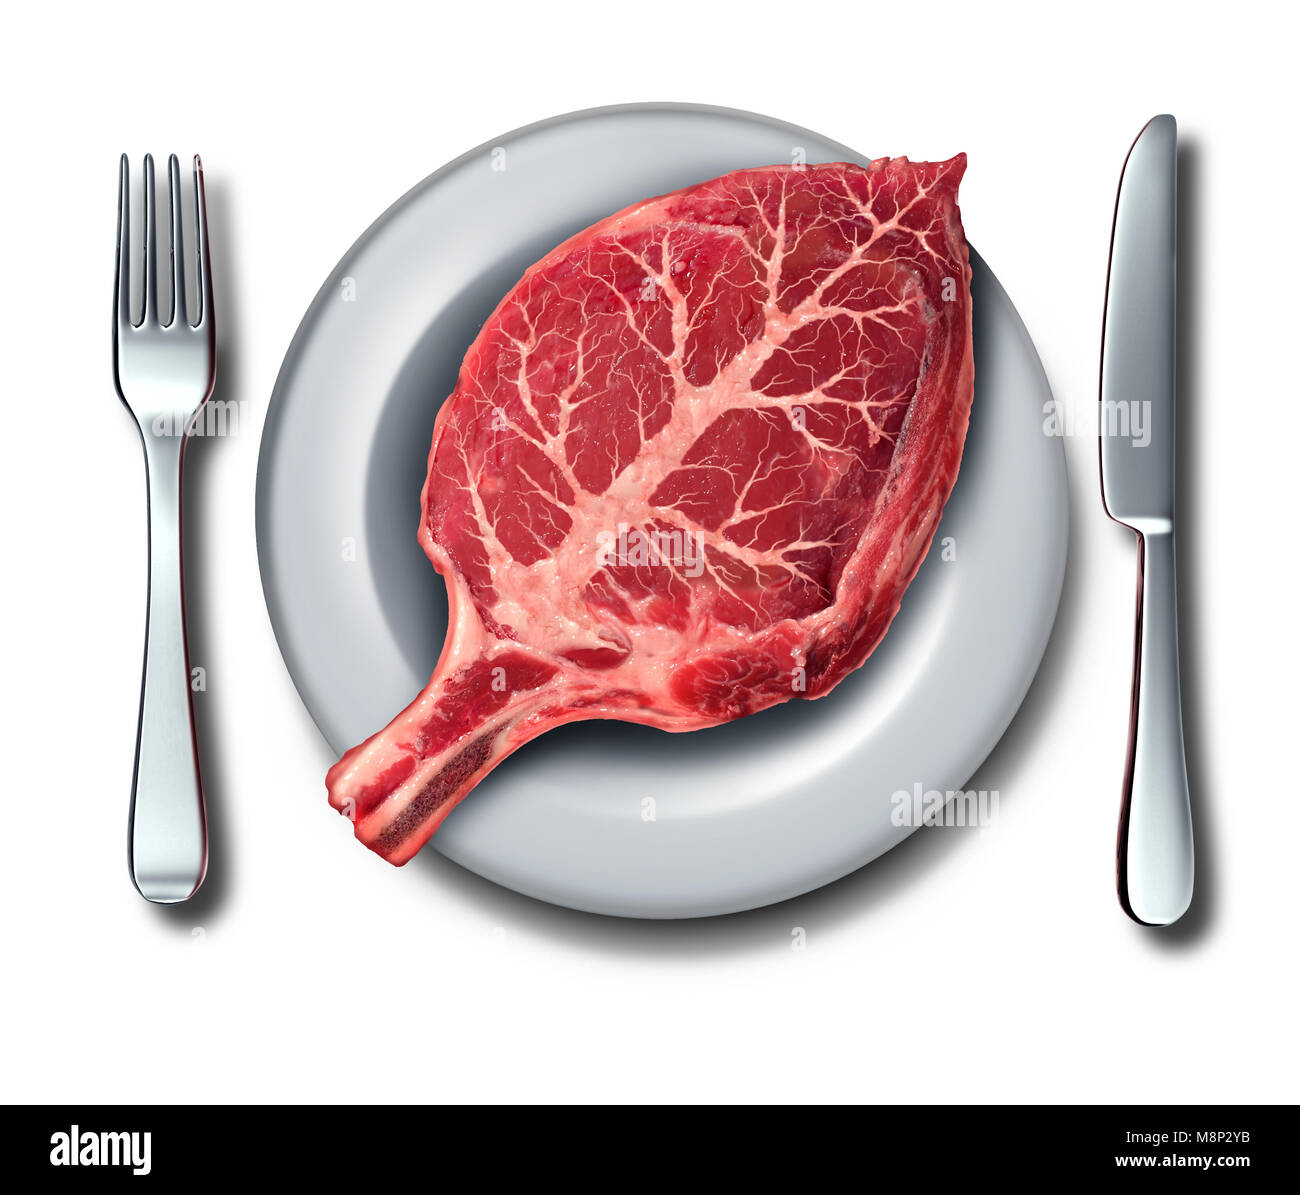 Eating organic food or paleo diet concept as a raw red steak shaped as a leaf on a plate with fork and knife with 3D illustration elements. Stock Photo